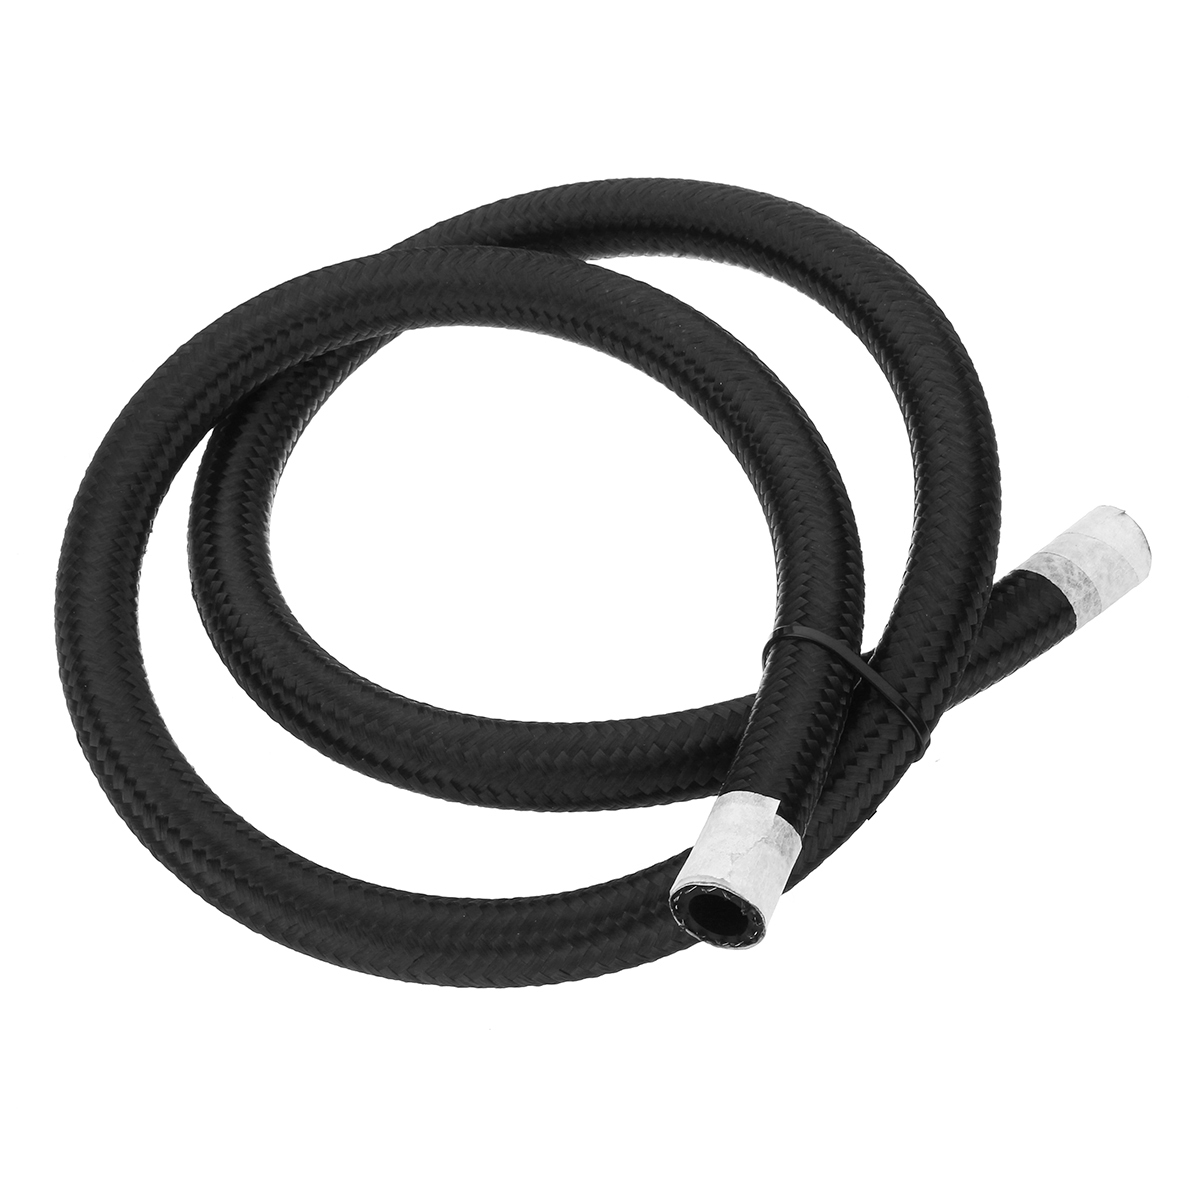 Black AN8 -8 an Stainless Steel Braided Brake Gas/Oil/Fuel Line Hose 1 Meter